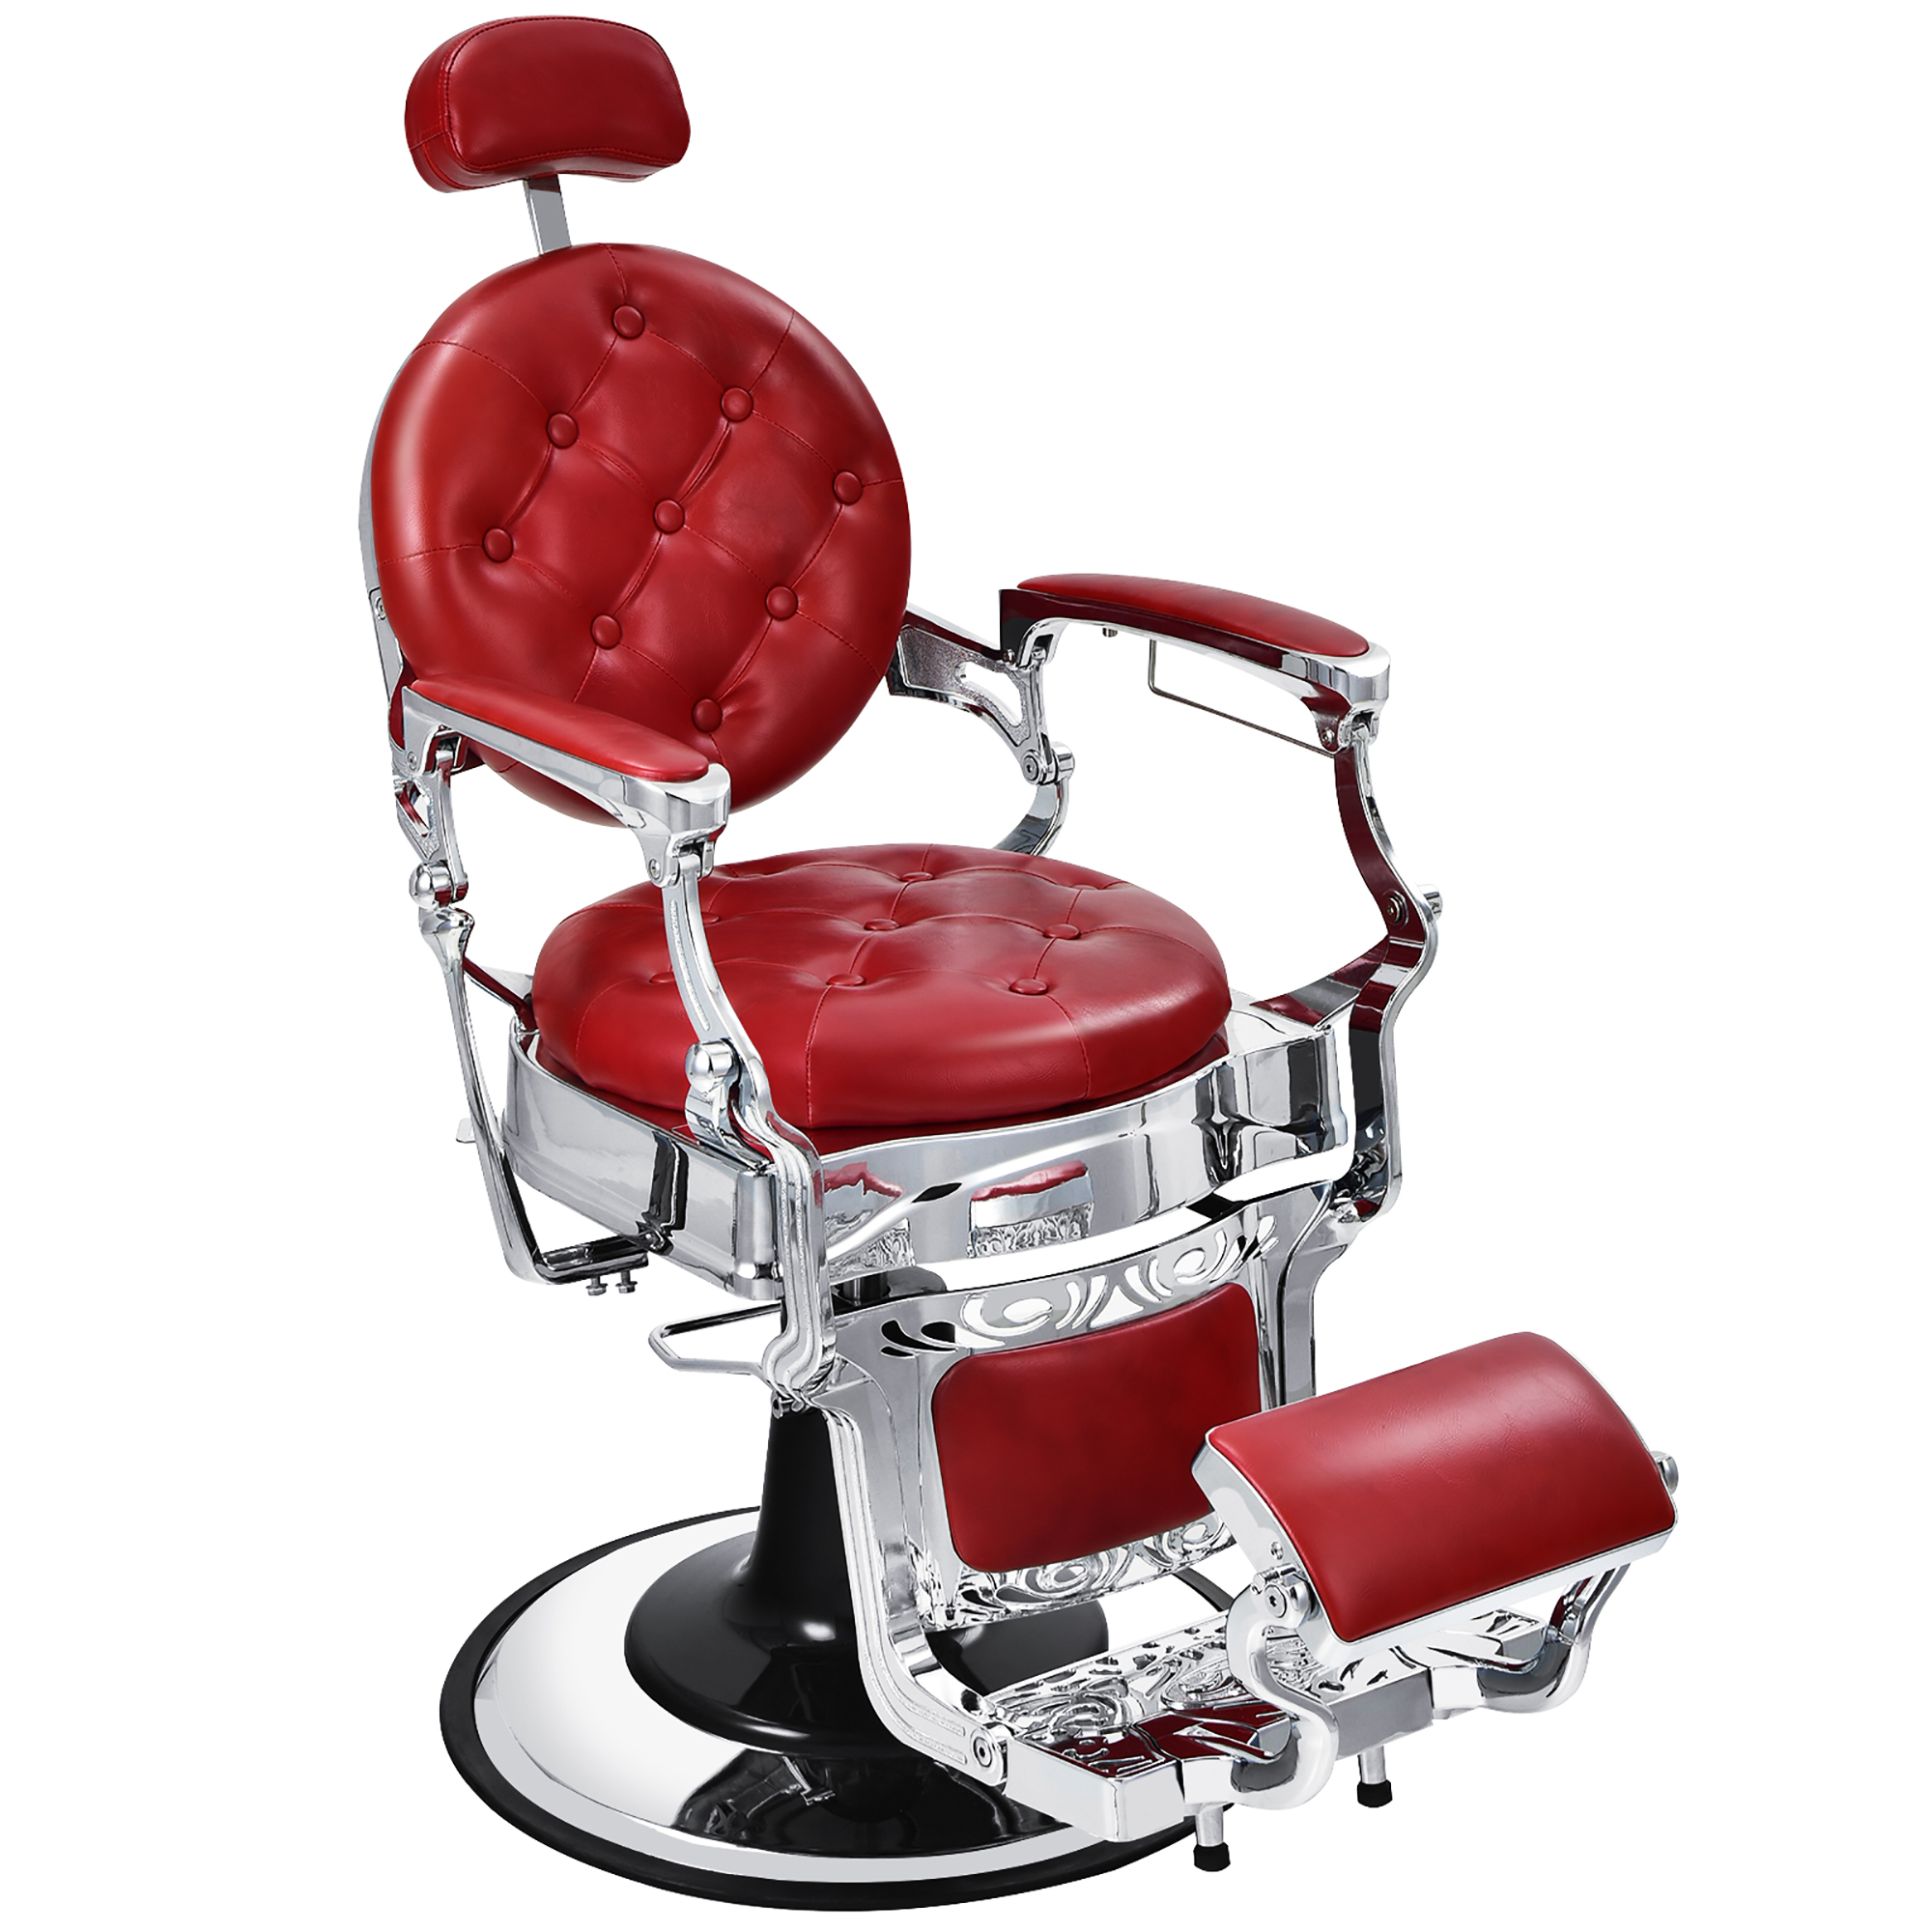 Costway Chair Salon Chair Hydraulic Recline Beauty Spa Styling Equipment Red